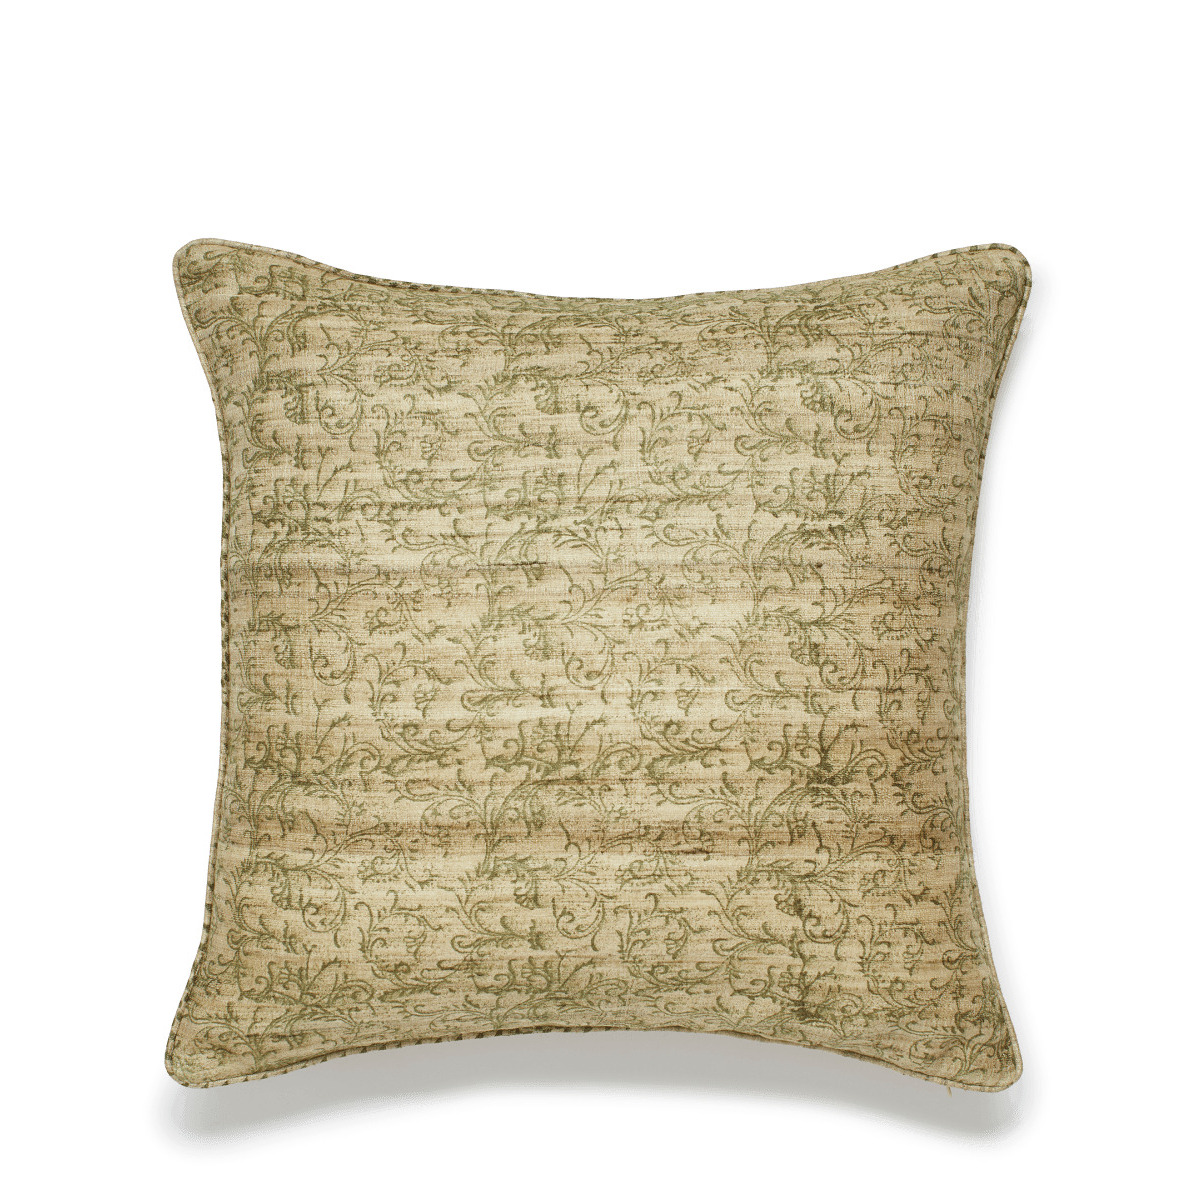 OKA, Grassetto Vine Cushion Cover - Green, Cushion Covers, Cotton/Silk, Botanical/Patterned/Printed